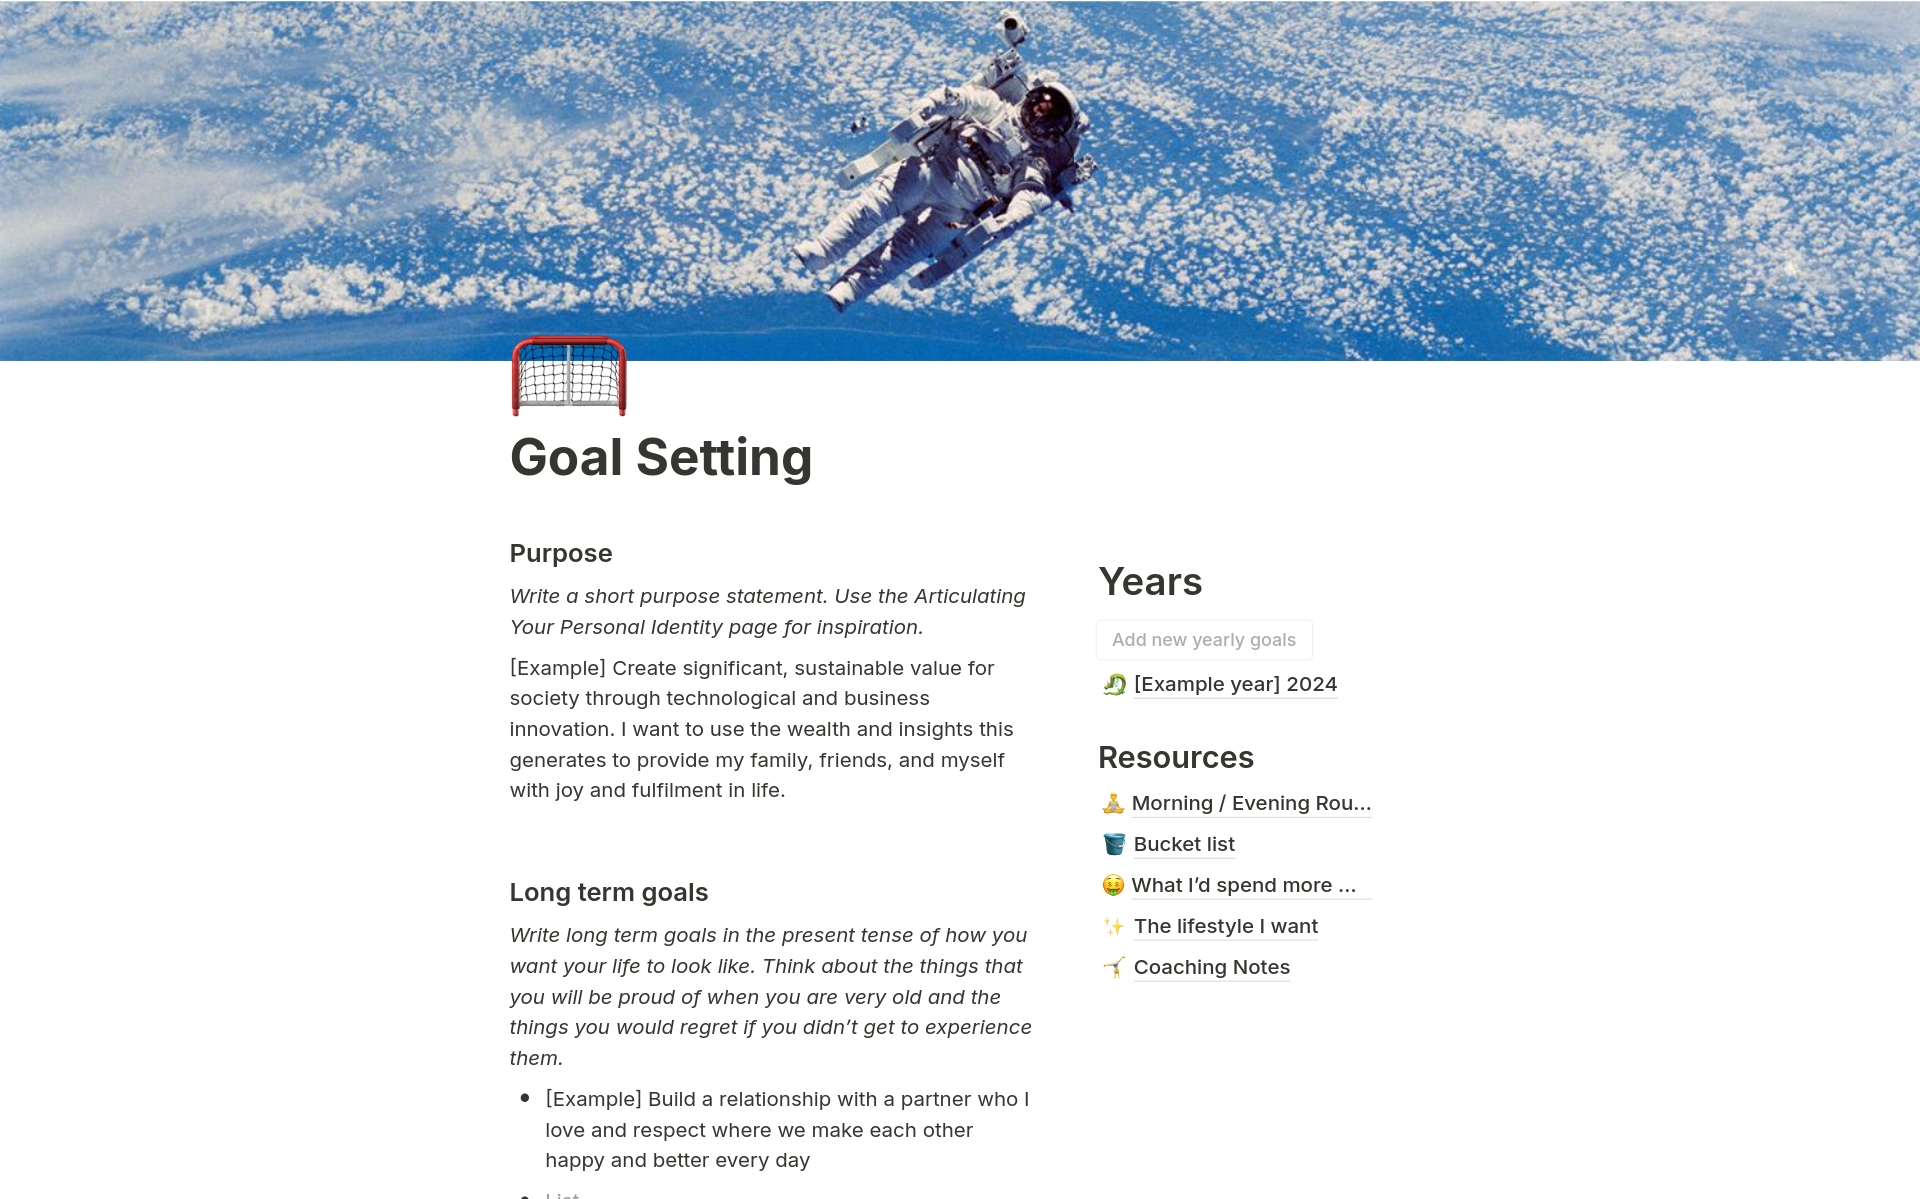 Goal setting resource with 
- Target Identity and long term goal setting
- Annual goal setting templates - taking all areas of your life into account
- Bonus frameworks for logging bucket list items, articulating the lifestyle you really want and more